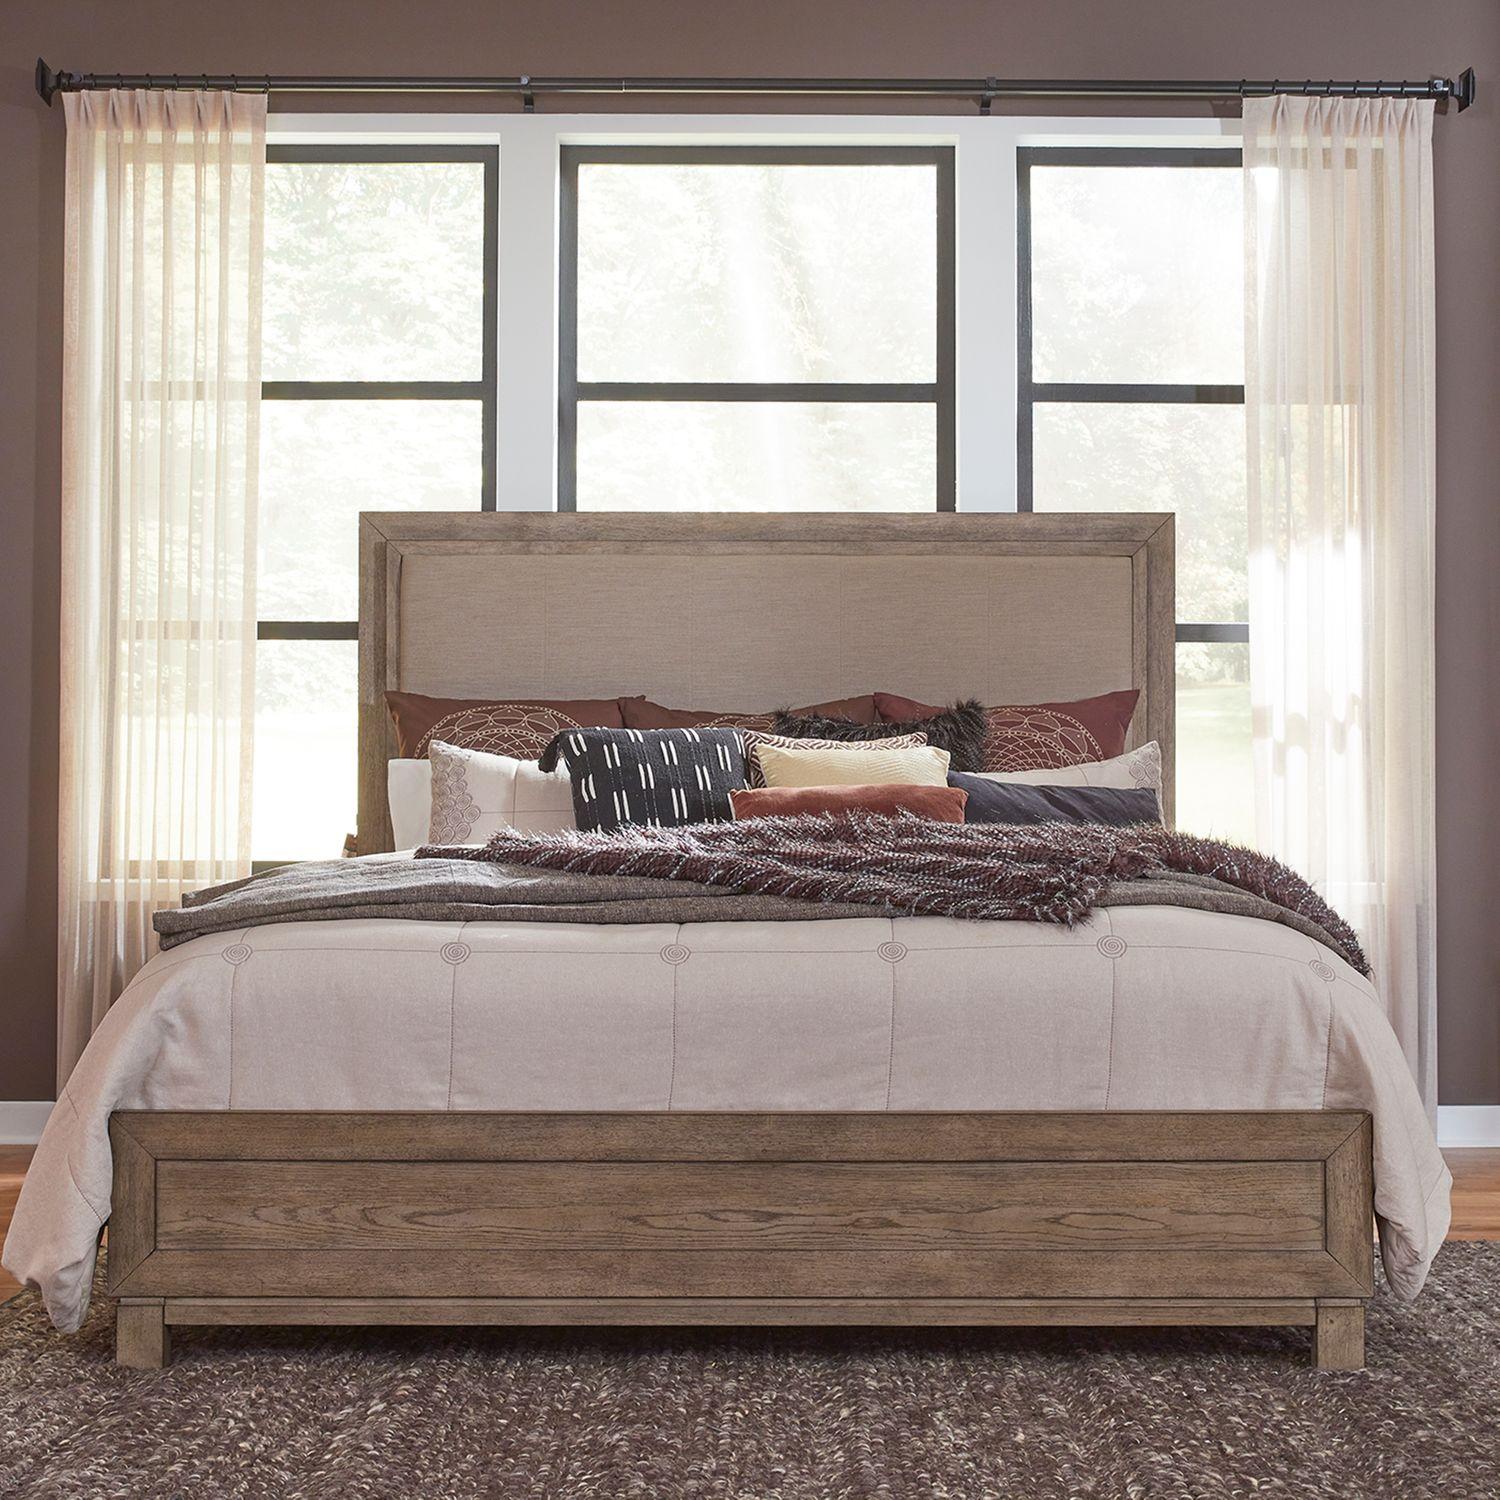 Classic Platform Bed Canyon Road (876-BR) 876-BR-KUB in Brown Linen